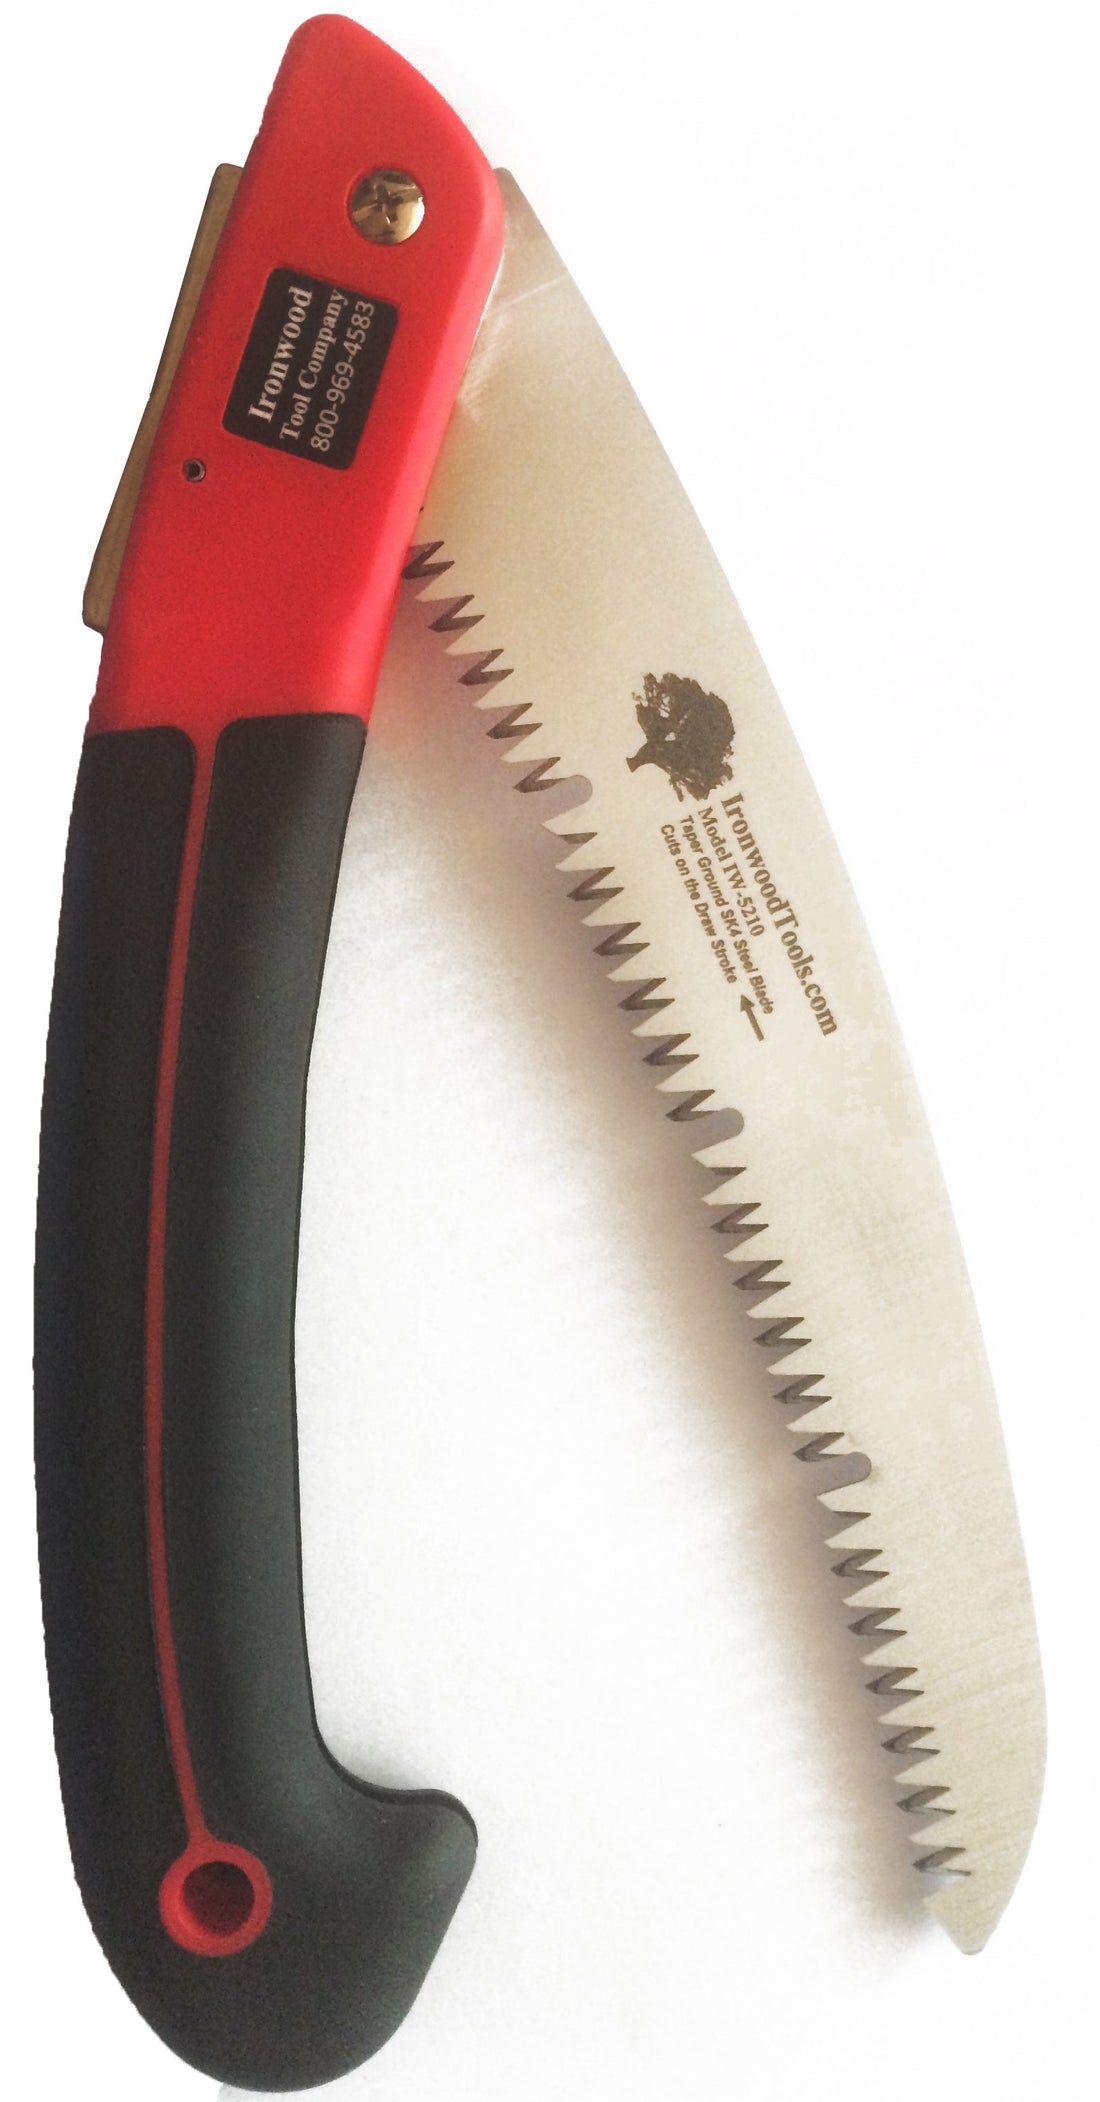 210MM FOLDING SAW - Durable Steel Blade with Non-Slip Grip (Hand Tools and Garden Tools)